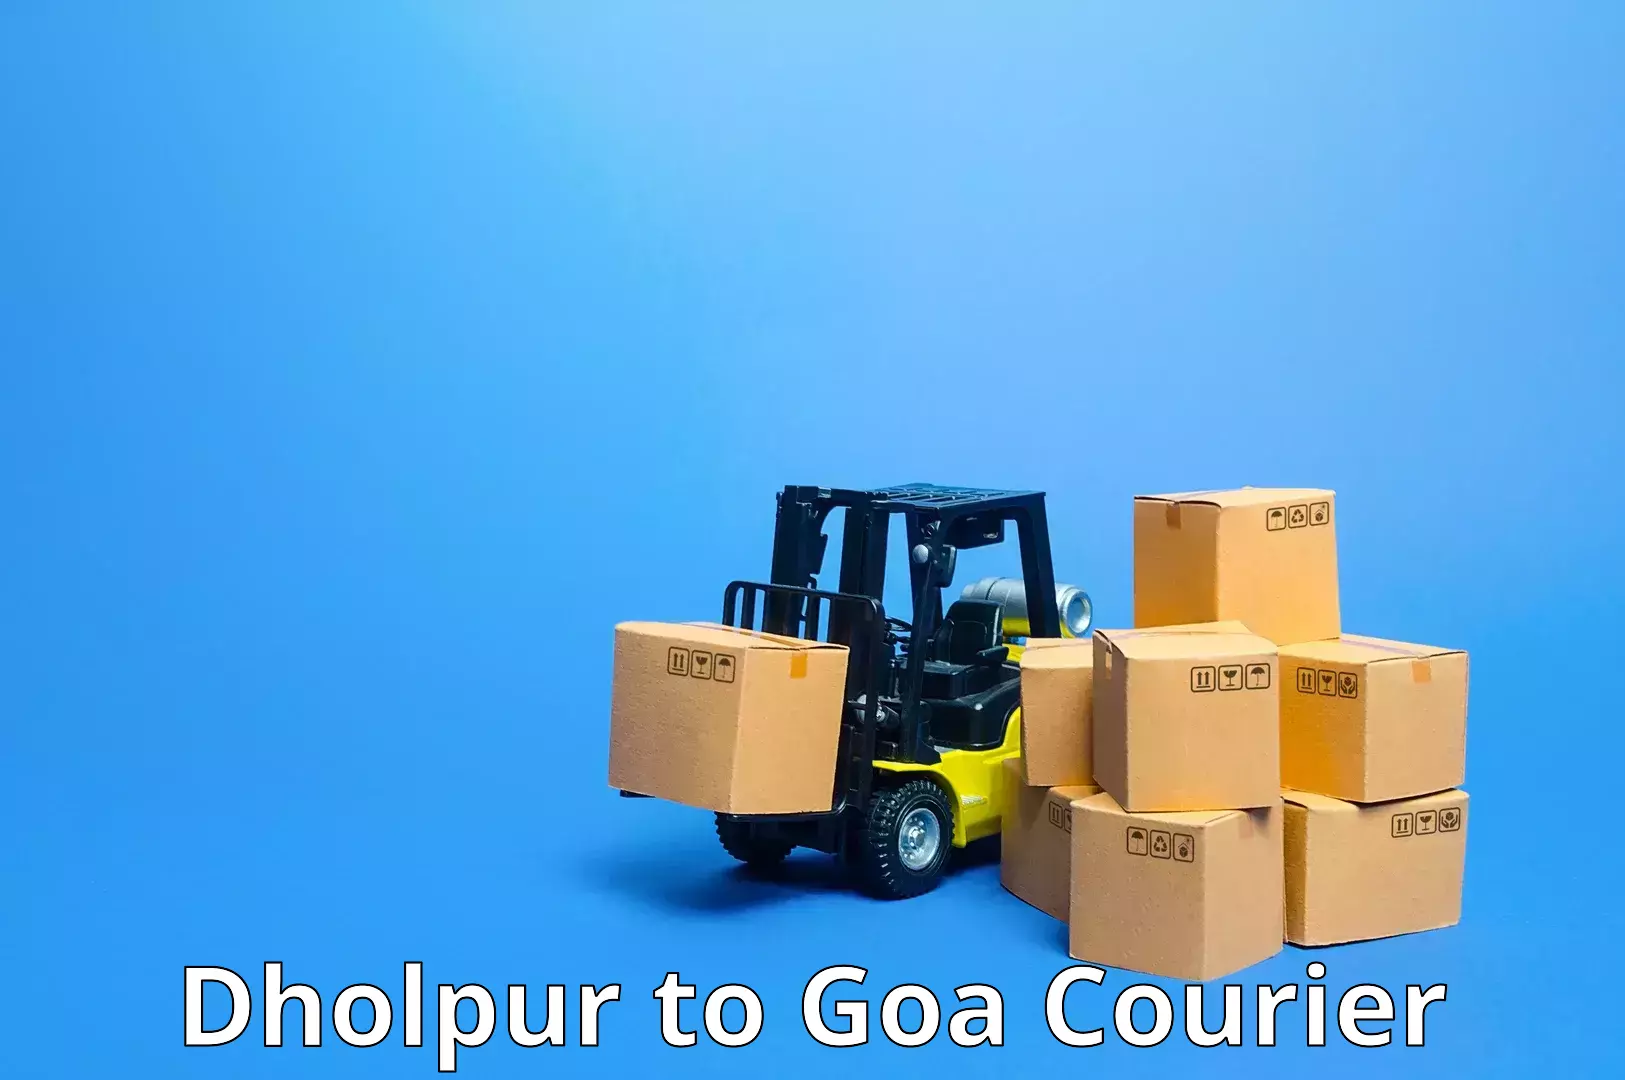 Tailored shipping plans Dholpur to Ponda